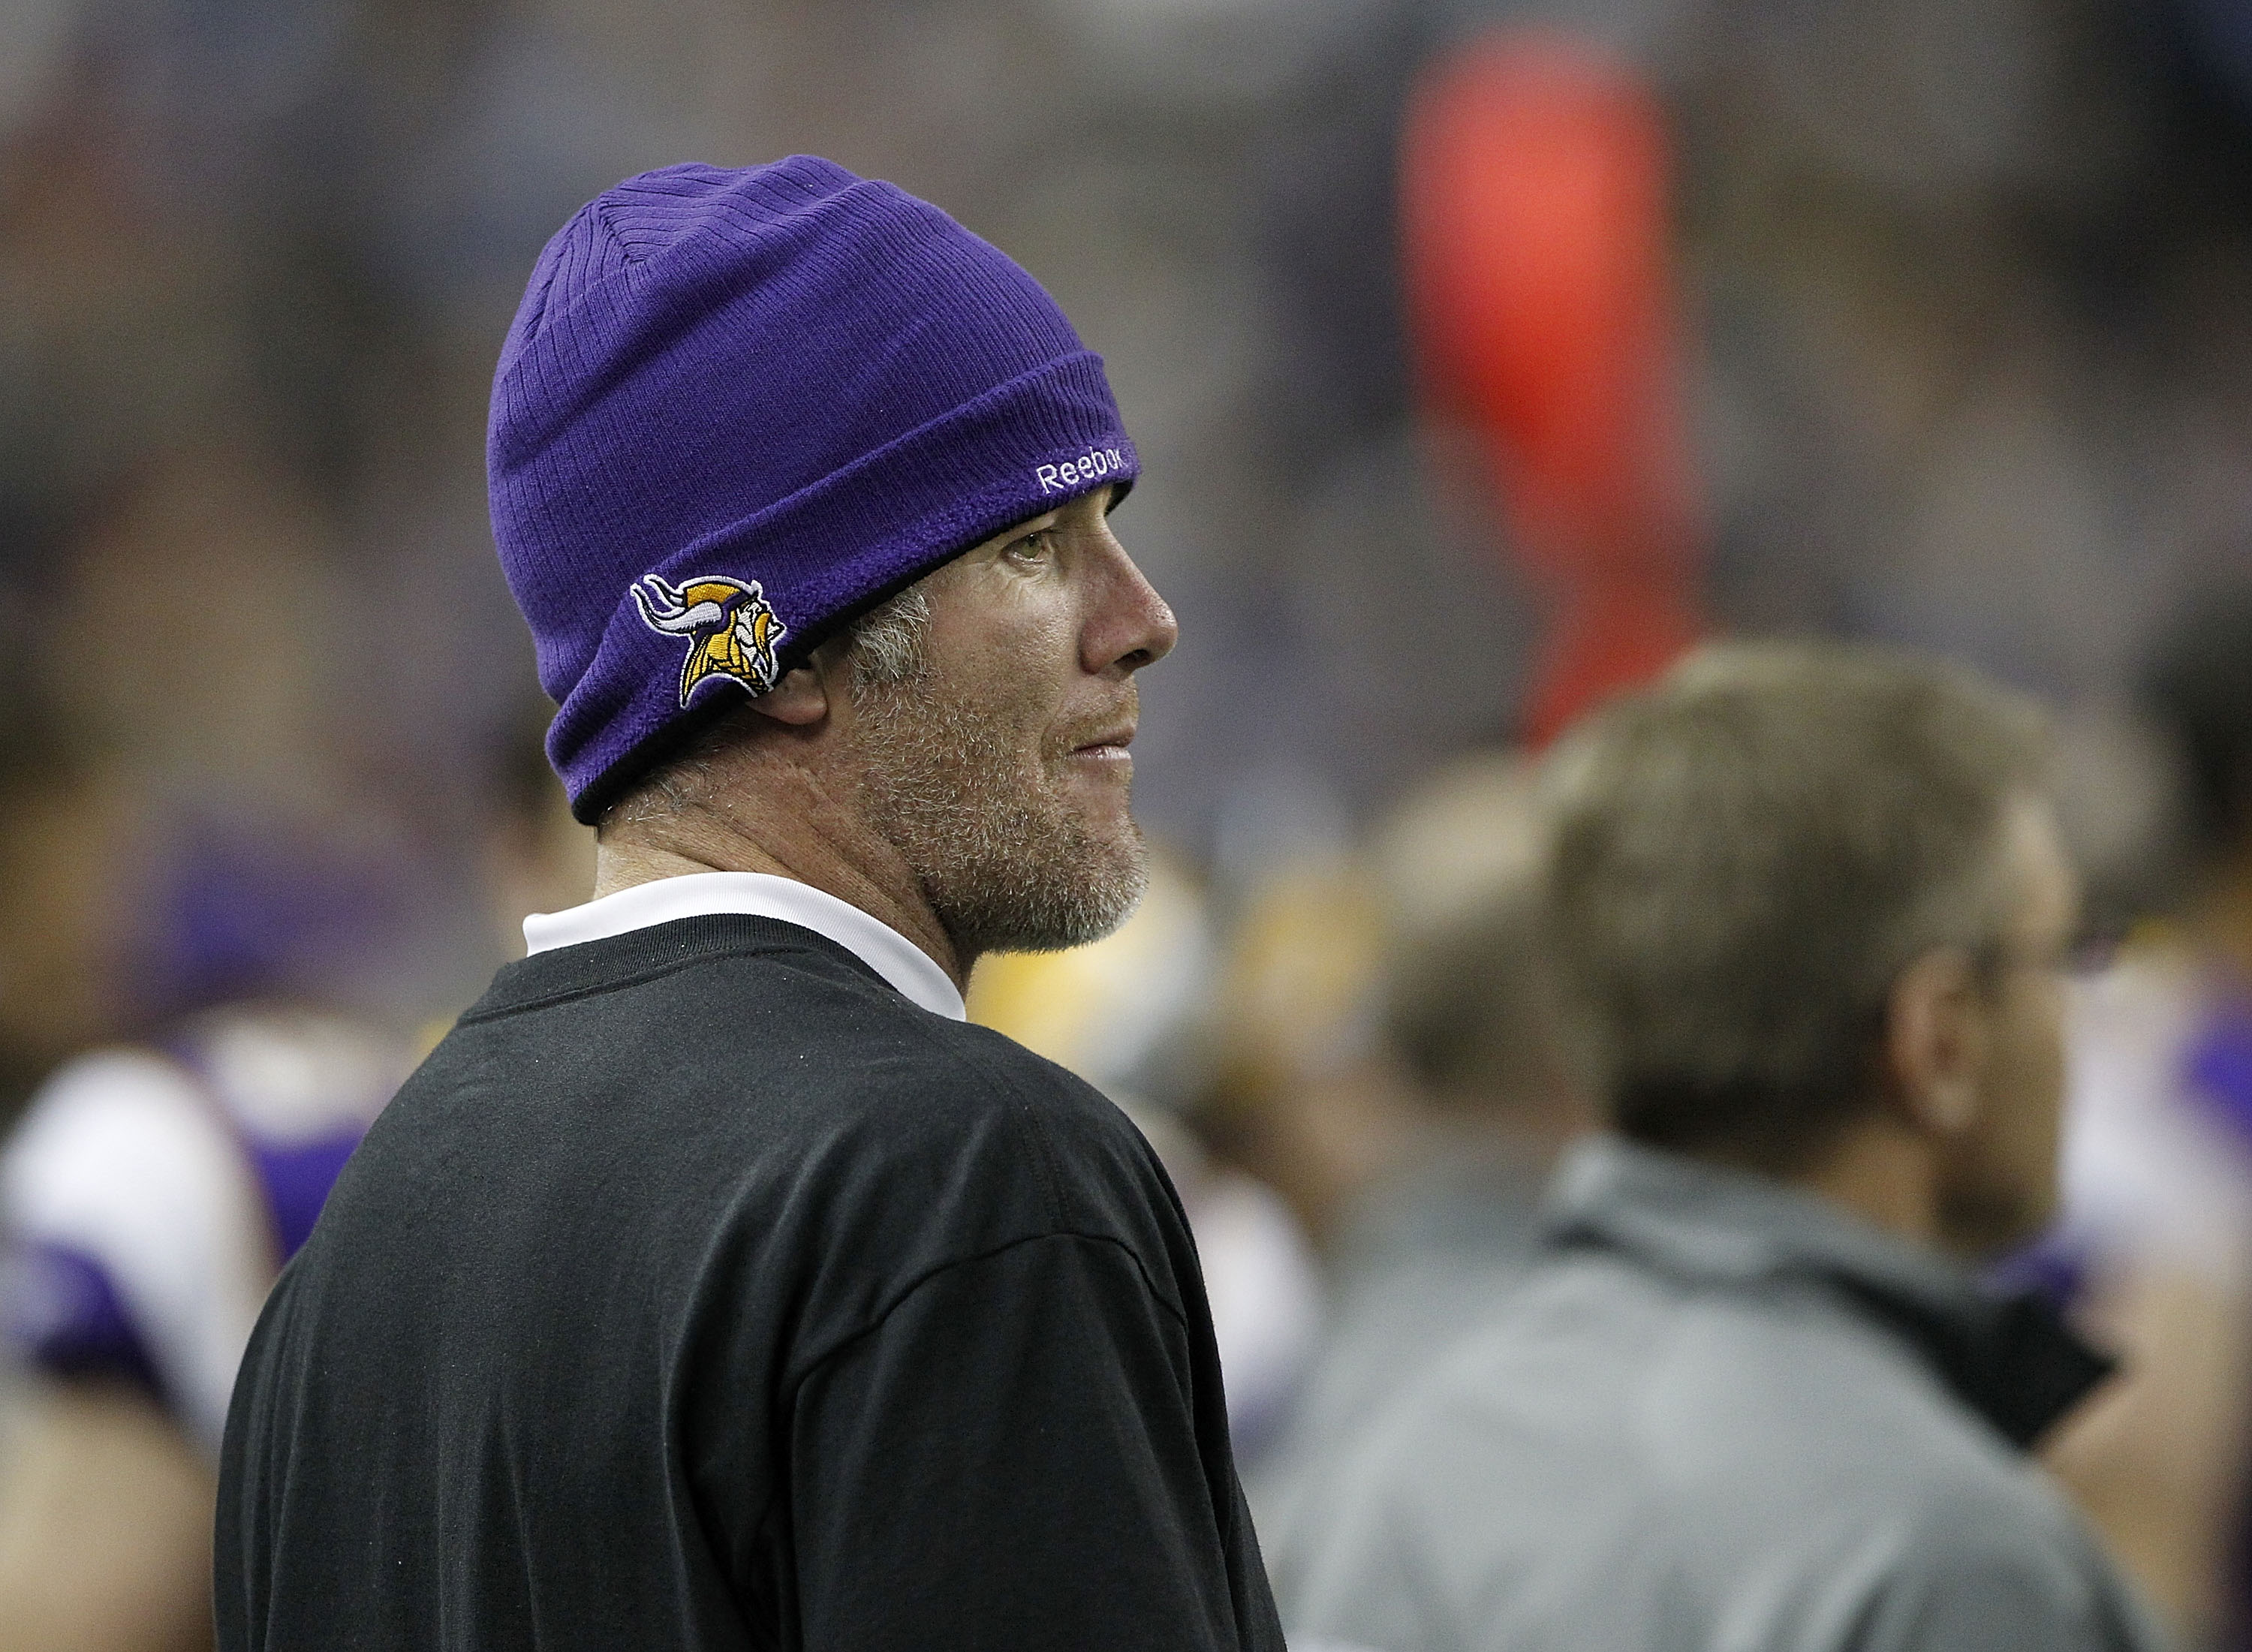 Quarterback Brett Favre #4 of the Minnesota Vikings watches the action during the game against the New York Giants at Ford Field on December 13, 2010 in Detroit, Michigan. The Giants defeated the Vikings 21-3. (Photo by Leon Halip/Getty Images)